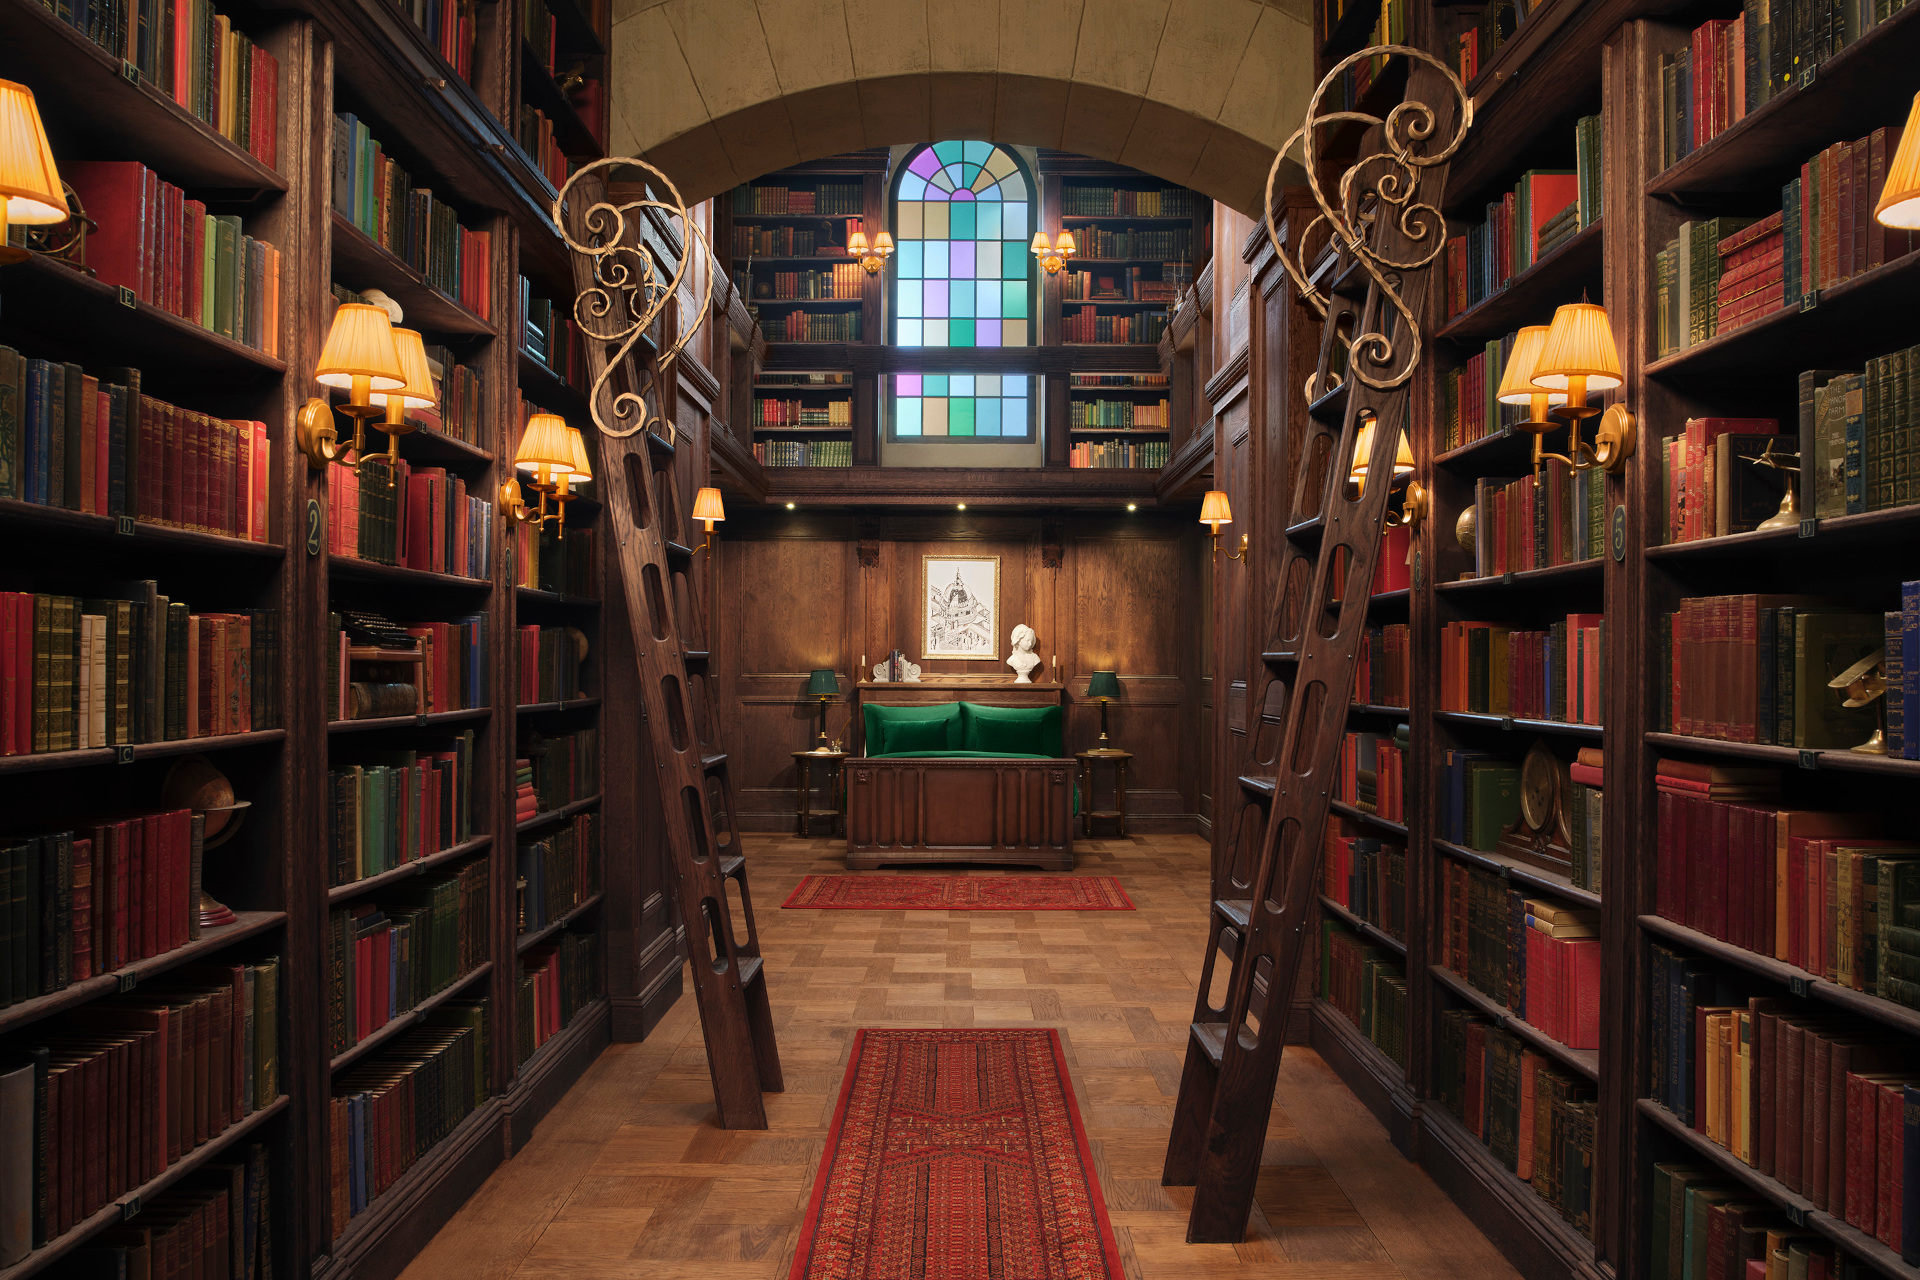 You Can Stay In This Hidden Library In St Paul's Cathedral For Just £7